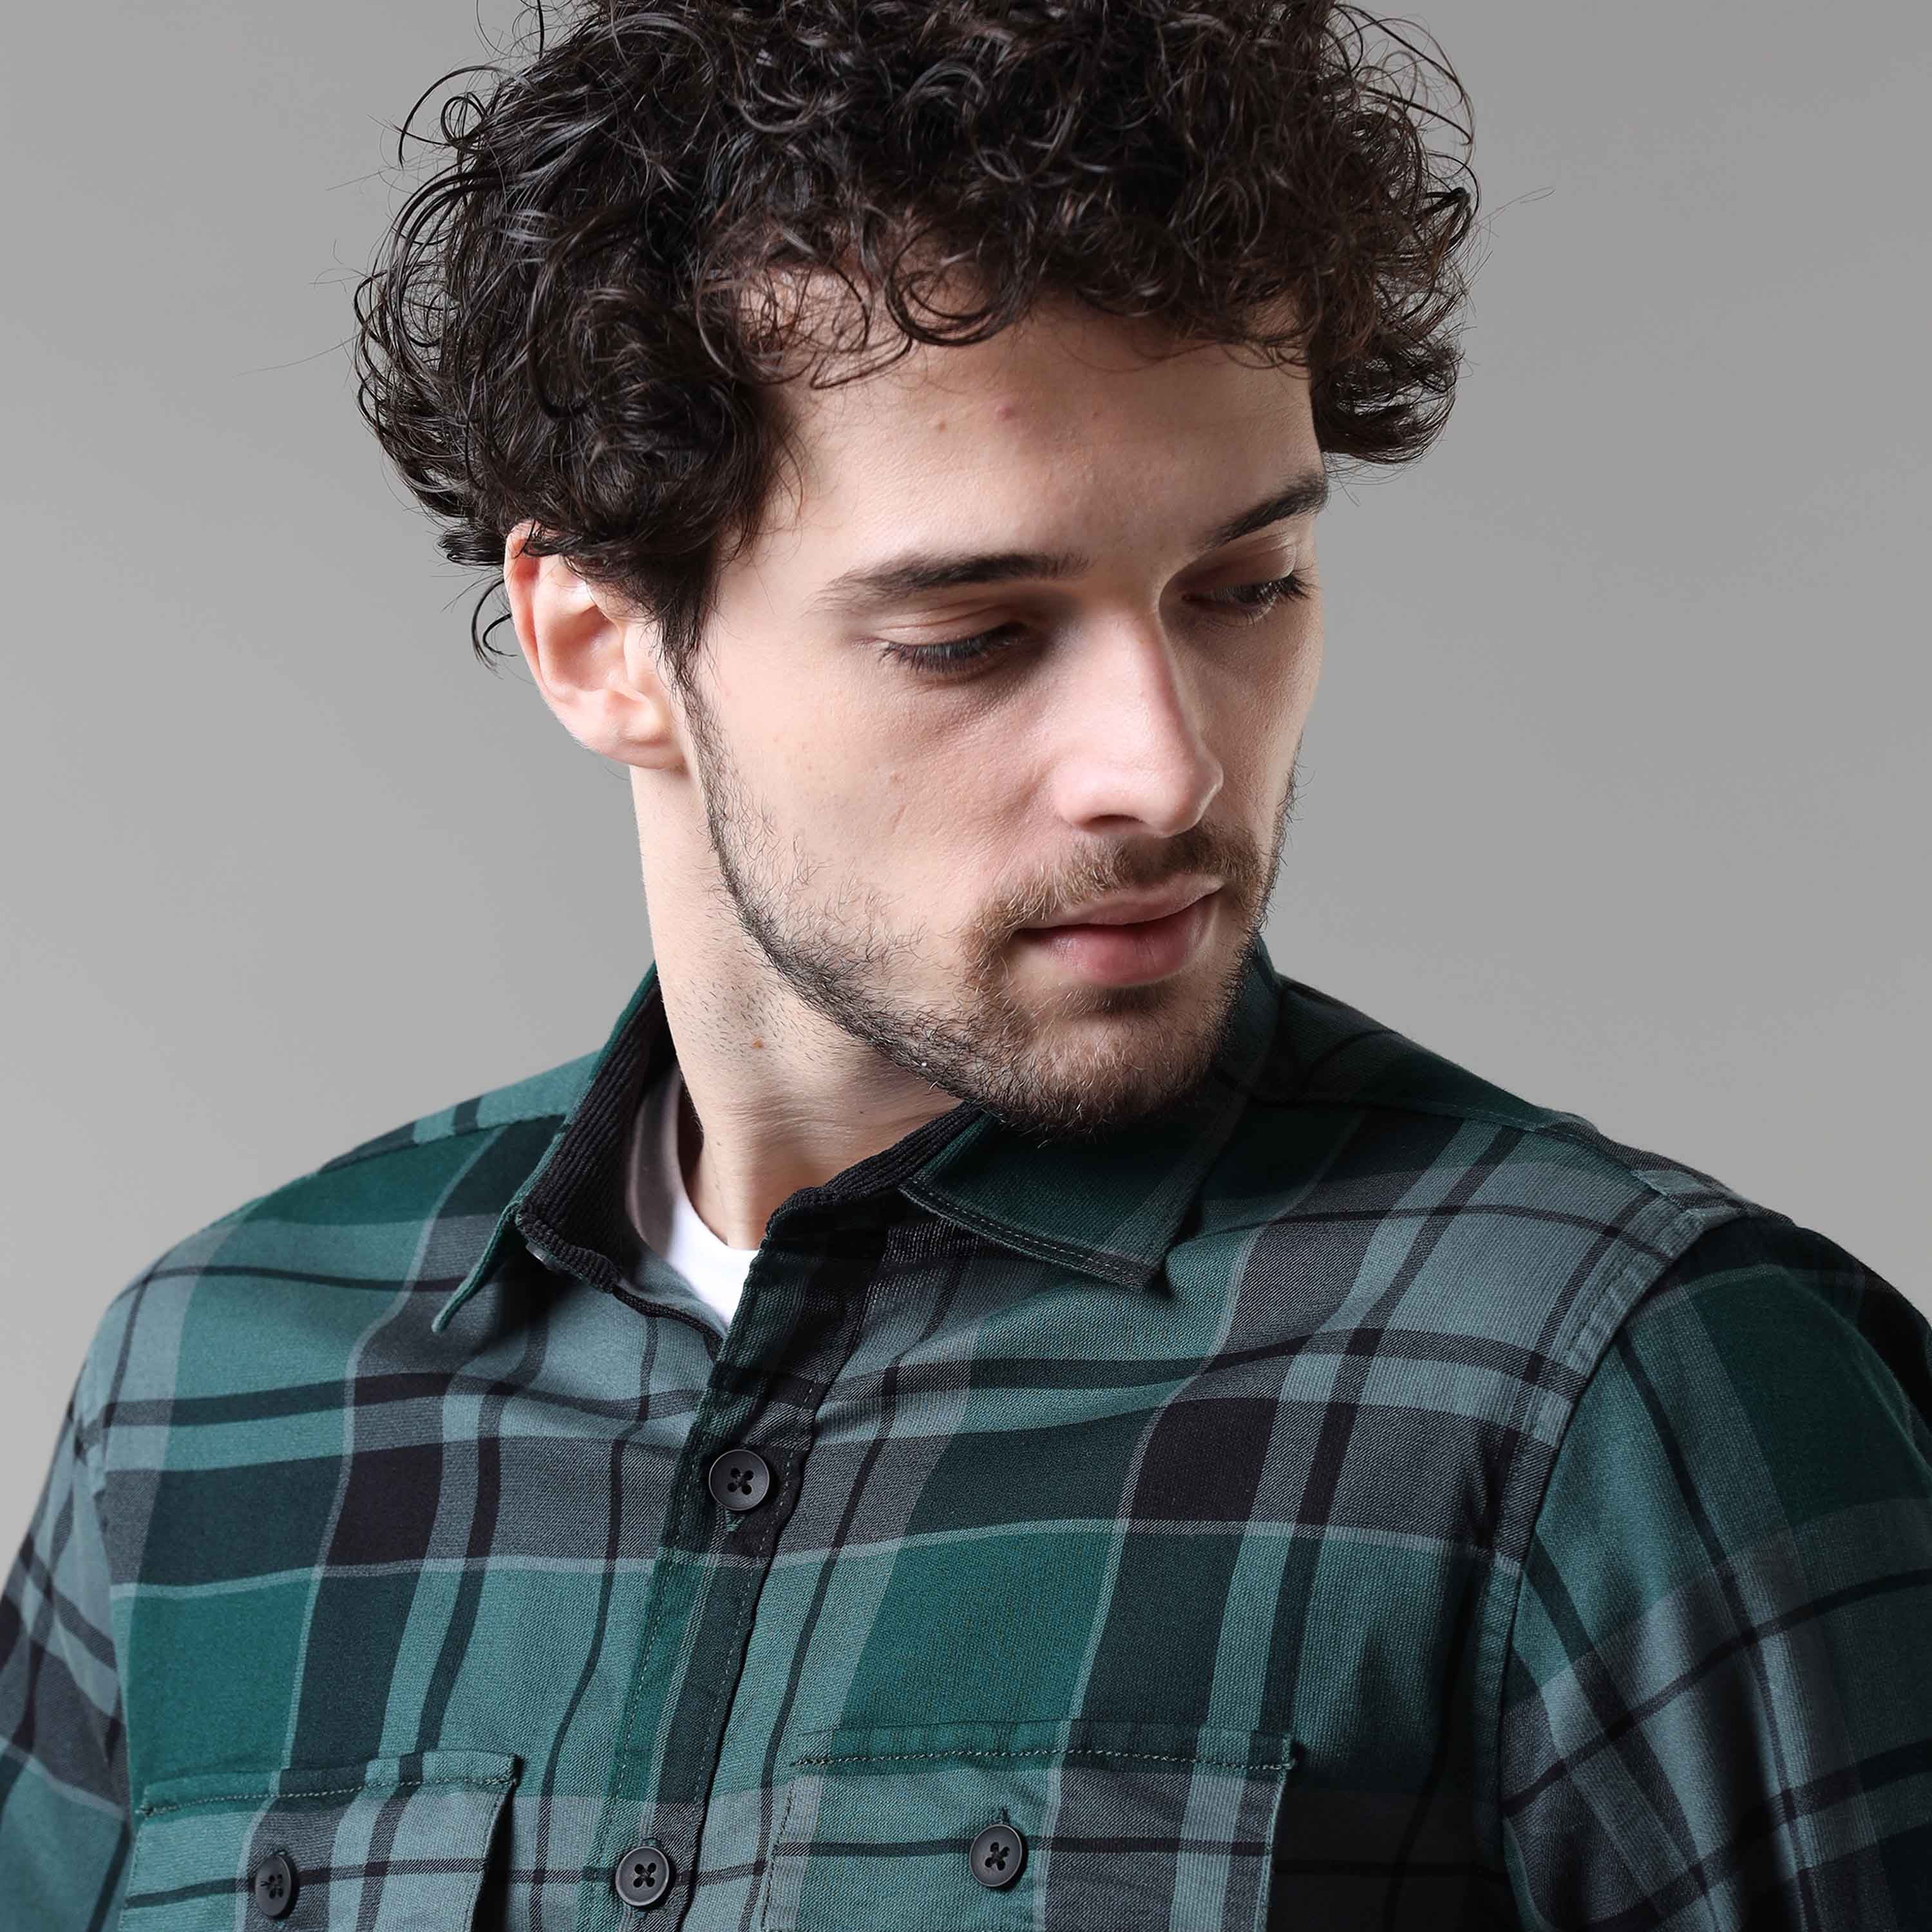 Buy Latest Green Check Shirt Online at Great PriceRs. 1399.00